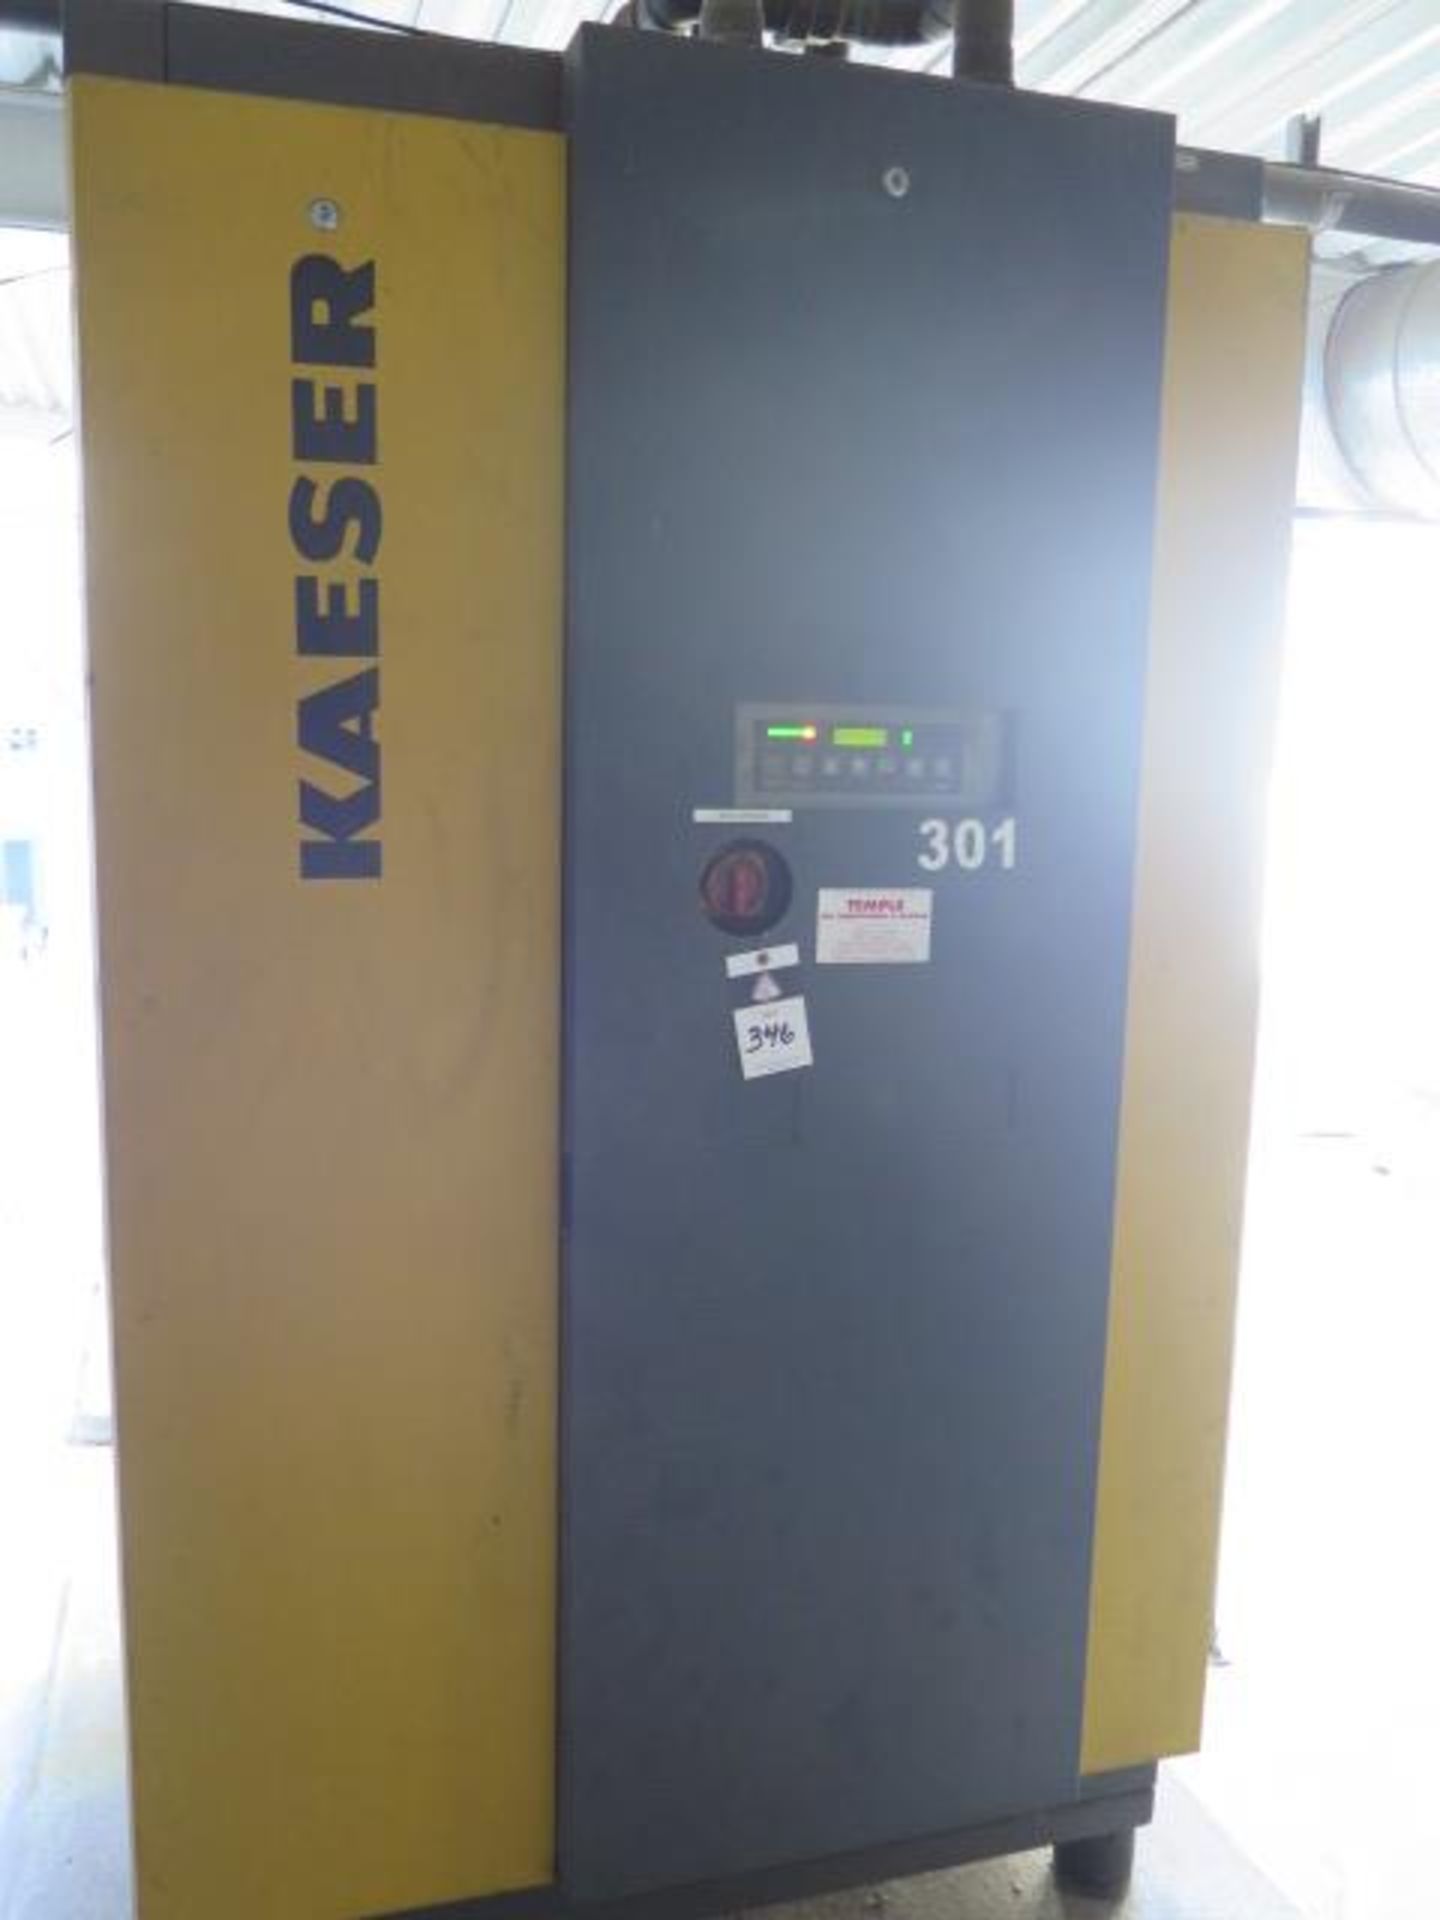 Kaeser 301 Refrigerated Air Dryer (SOLD AS-IS - NO WARRANTY) - Image 2 of 6